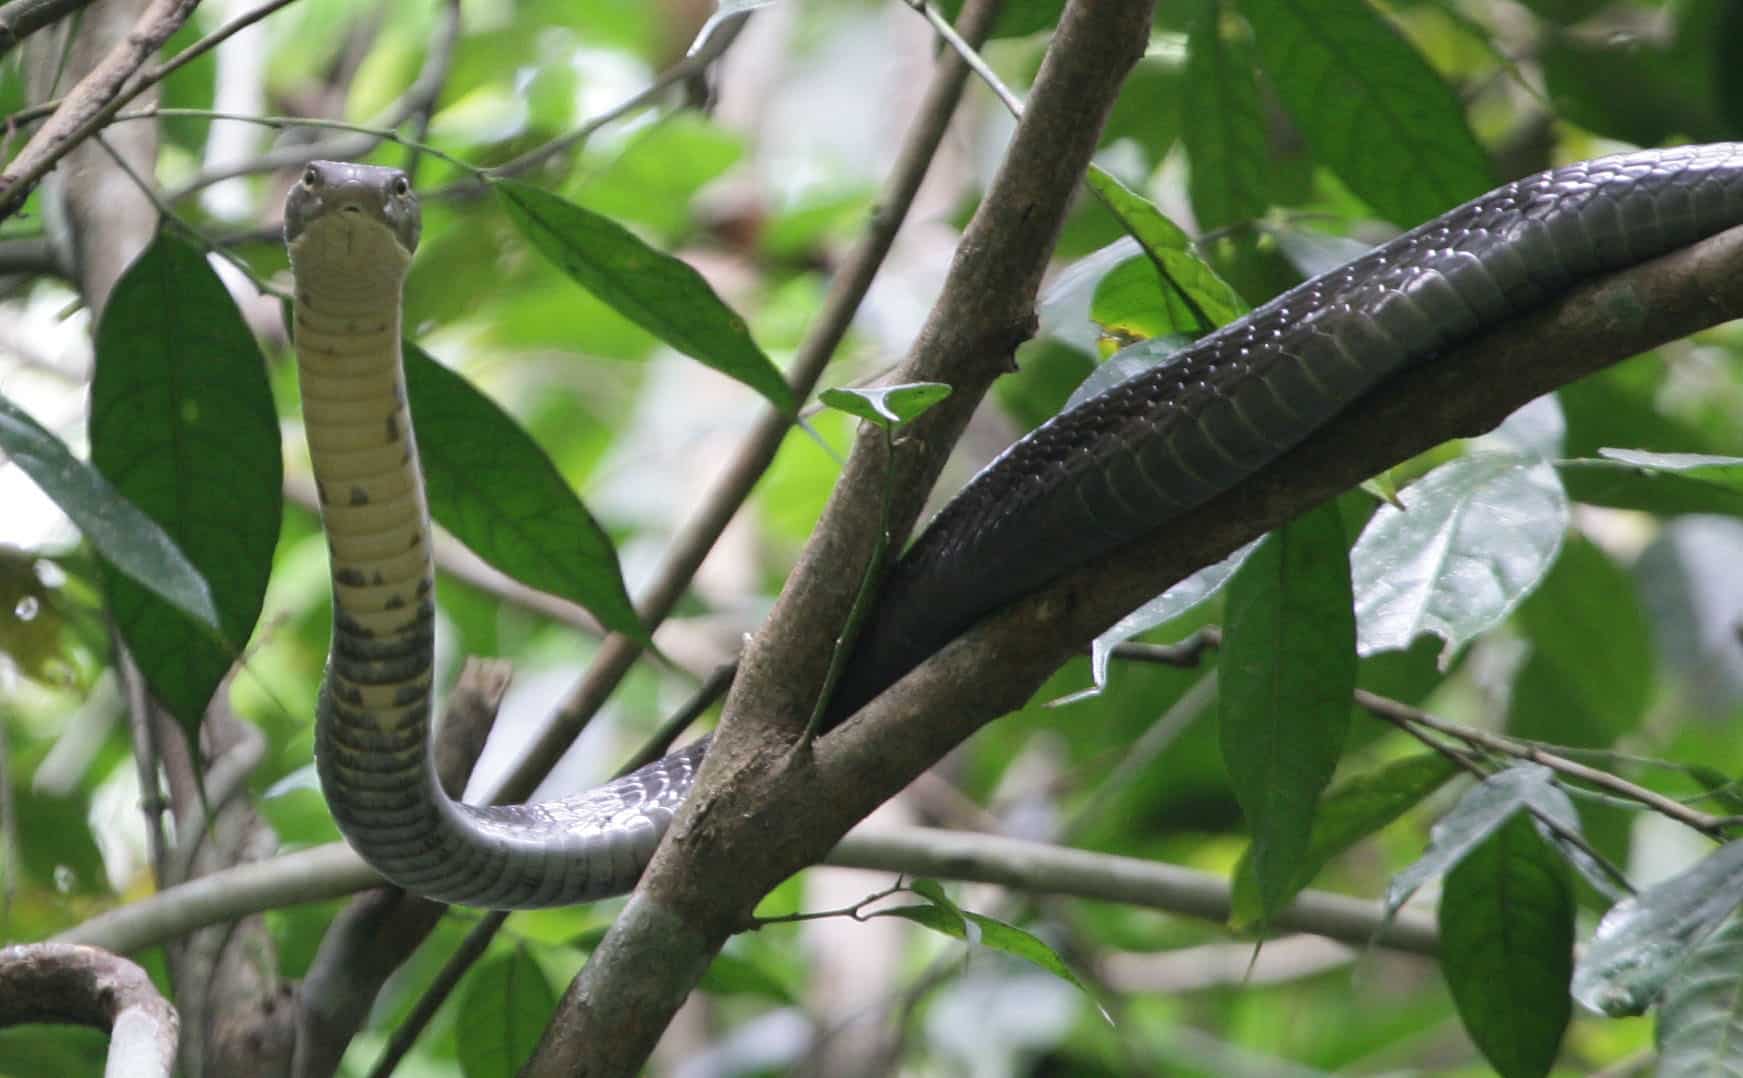 King cobra in a tree. "Kaeng Krachan NP in December 2011, both during the daytime. I think the big one in a tree might be a king cobra but not sure. It was 3.5m long and about as thick as my arm." ©2012 Richard Baines.